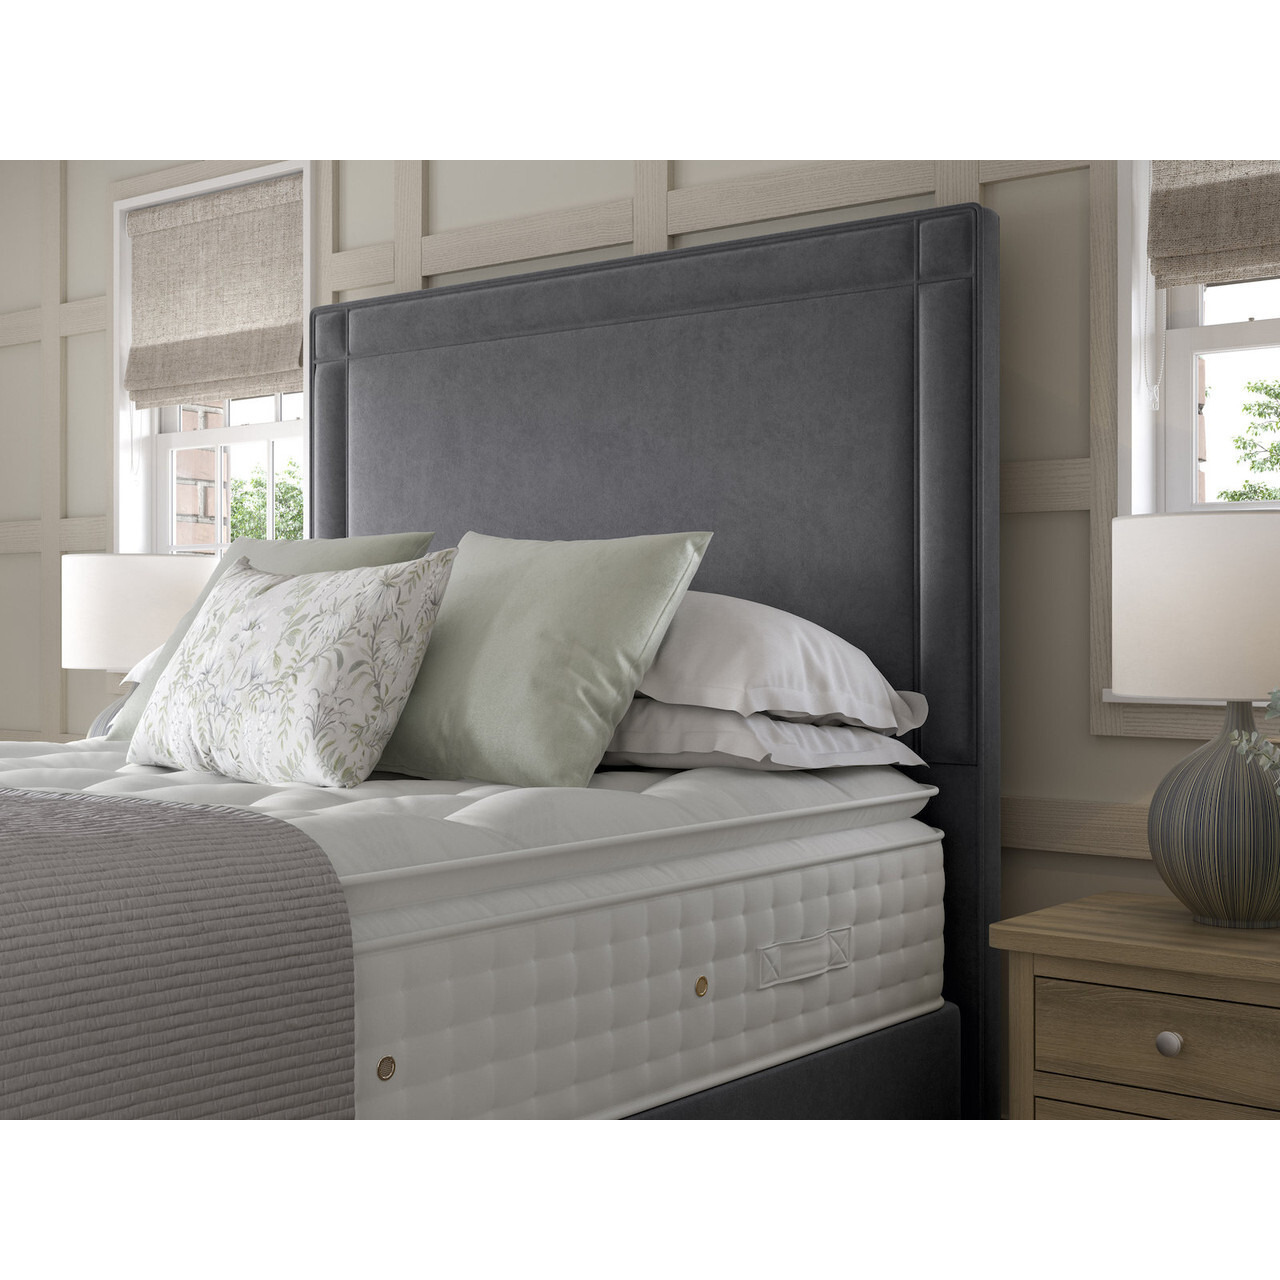 Staples & Co Buckingham Piped Hotel Height Headboard - image 1